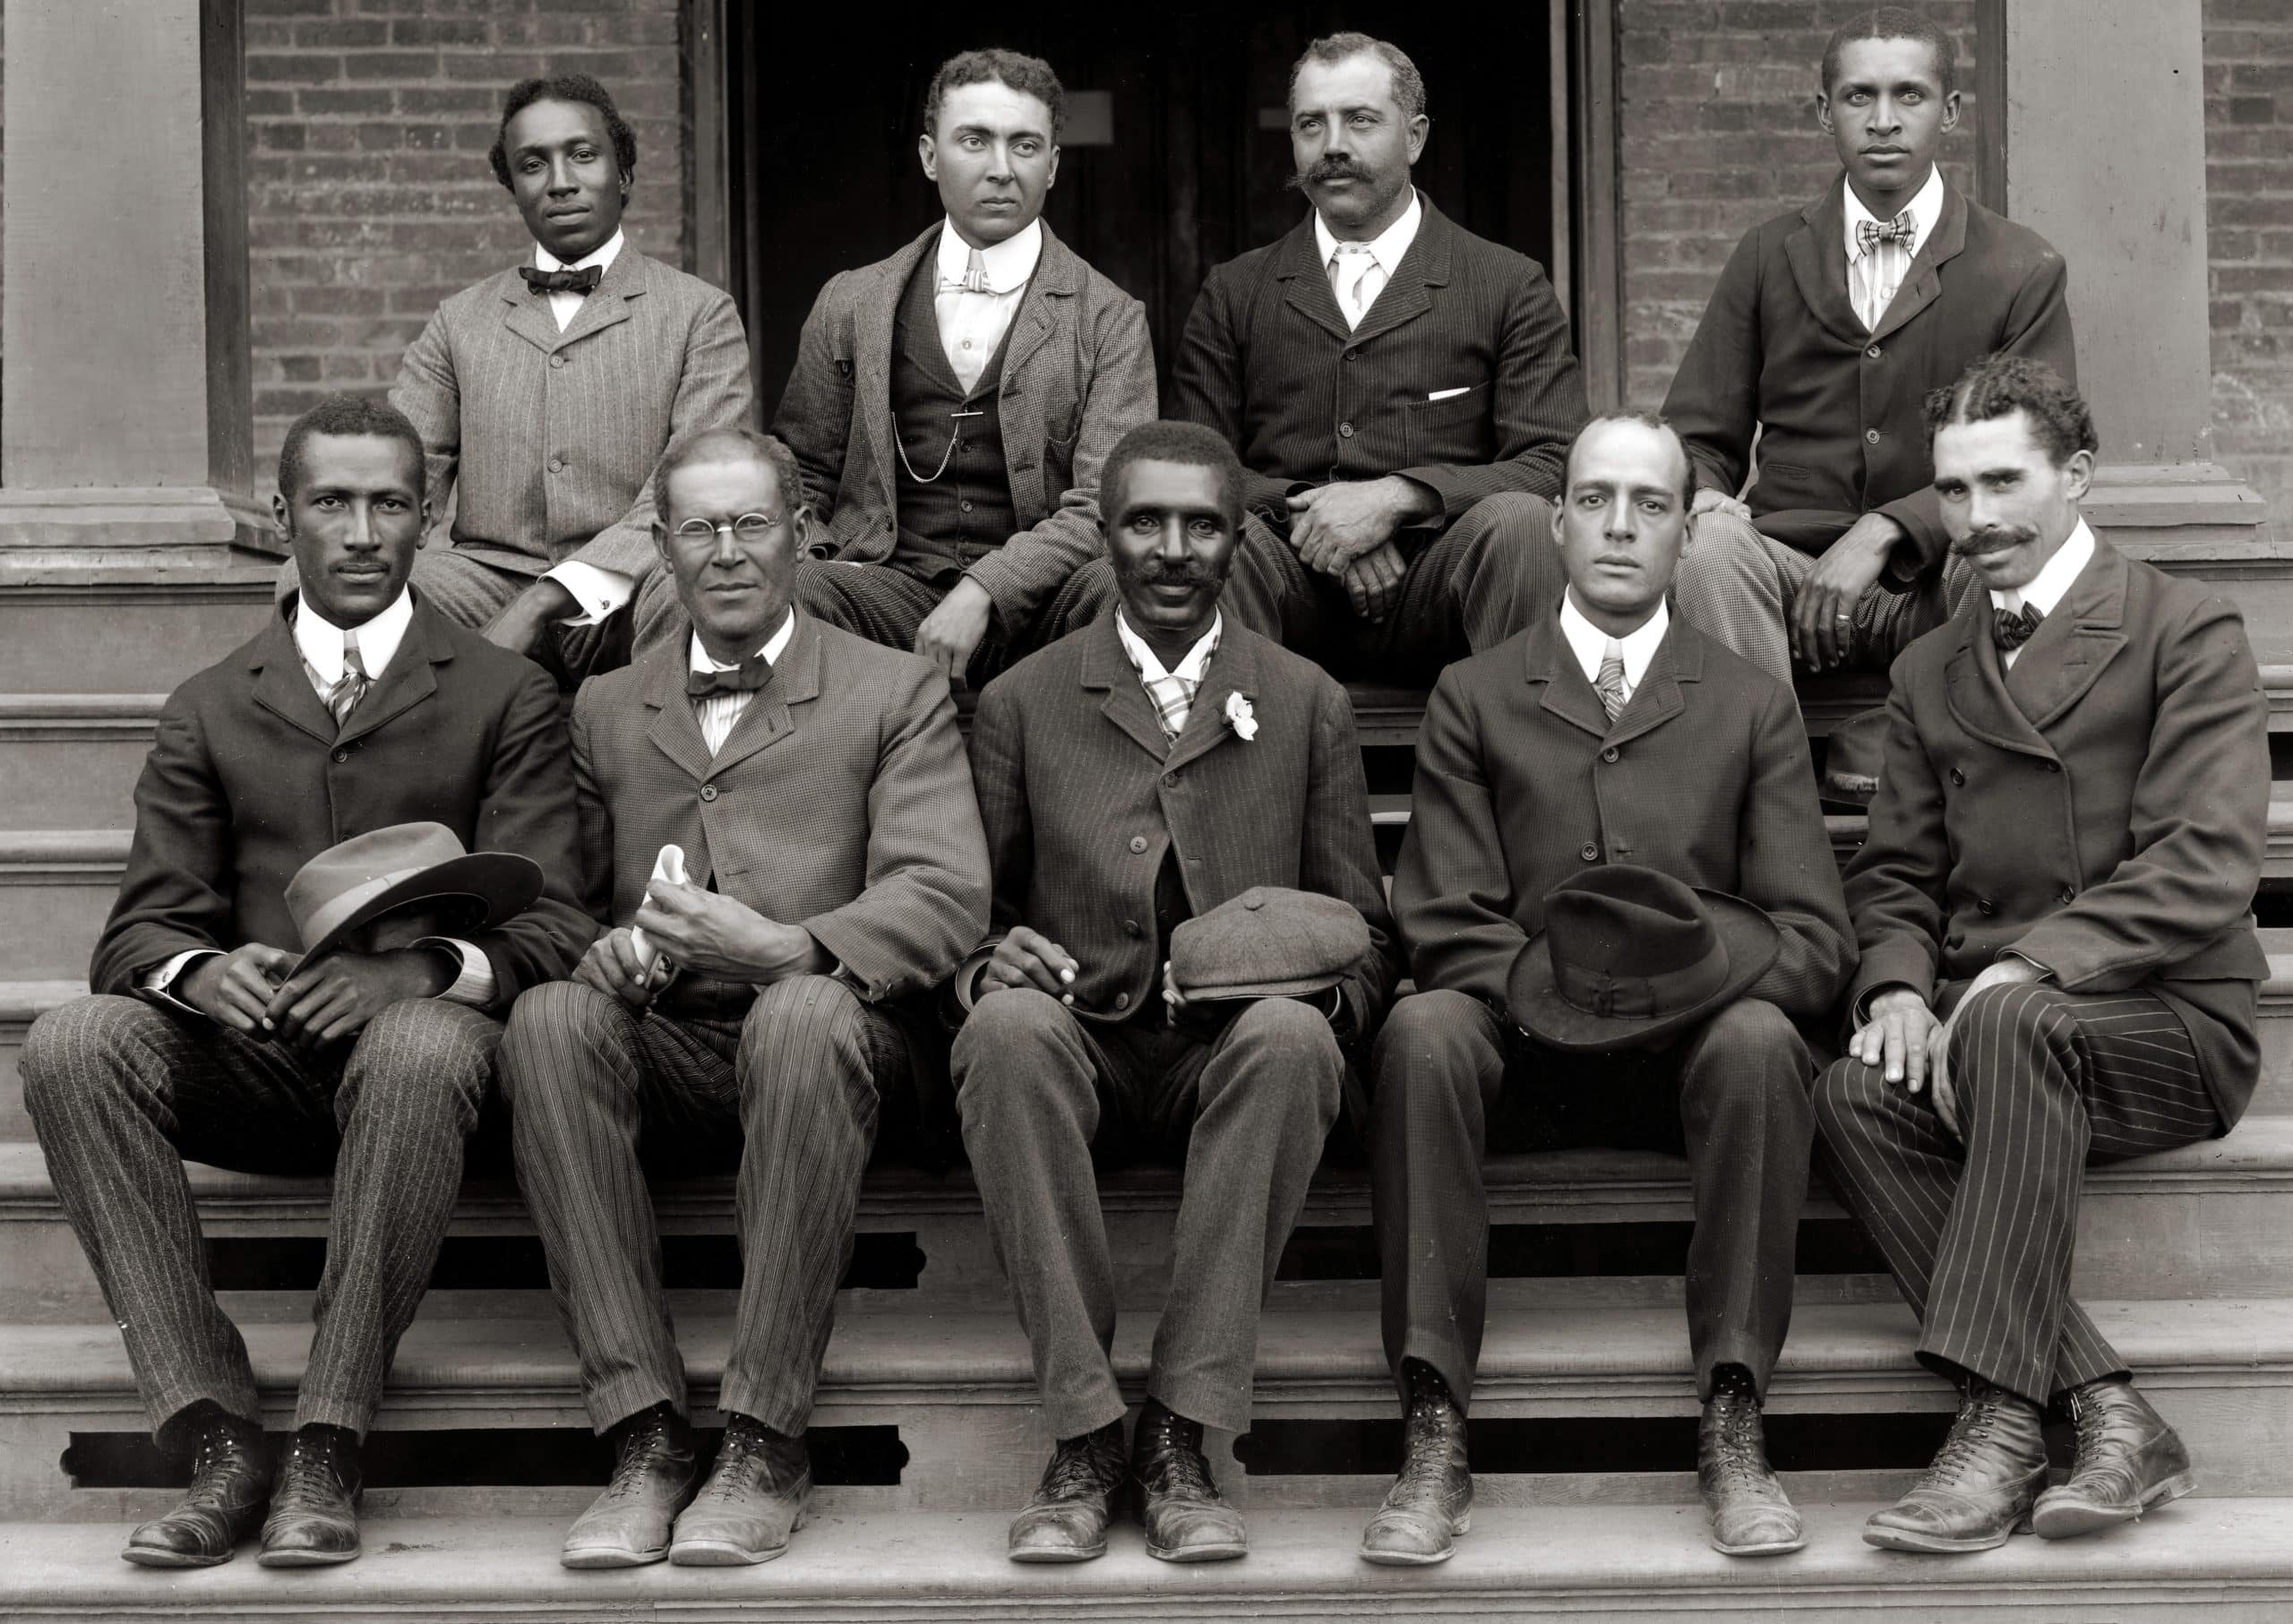 George Washington Carver (front row, center) poses with fellow faculty of Tuskegee Institute.